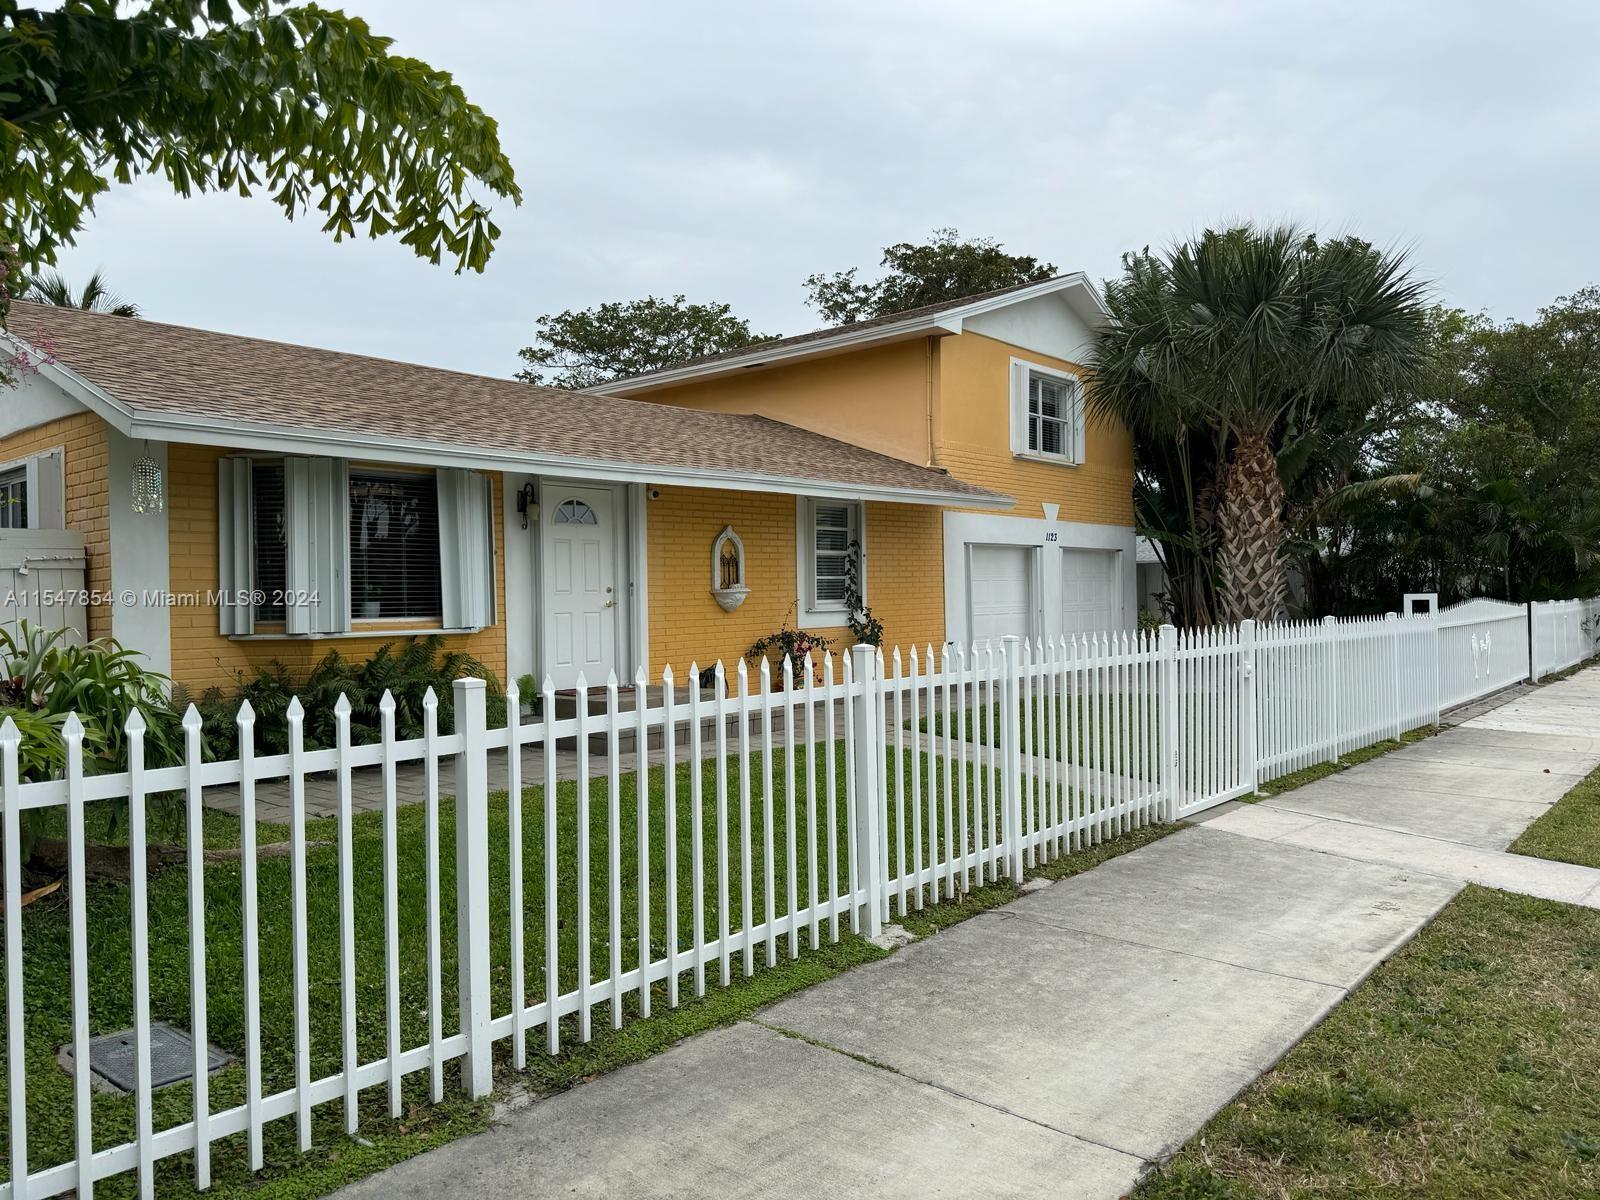 1123 N 18th Ave N Ave, Lake Worth, Palm Beach County, Florida - 5 Bedrooms  
3 Bathrooms - 